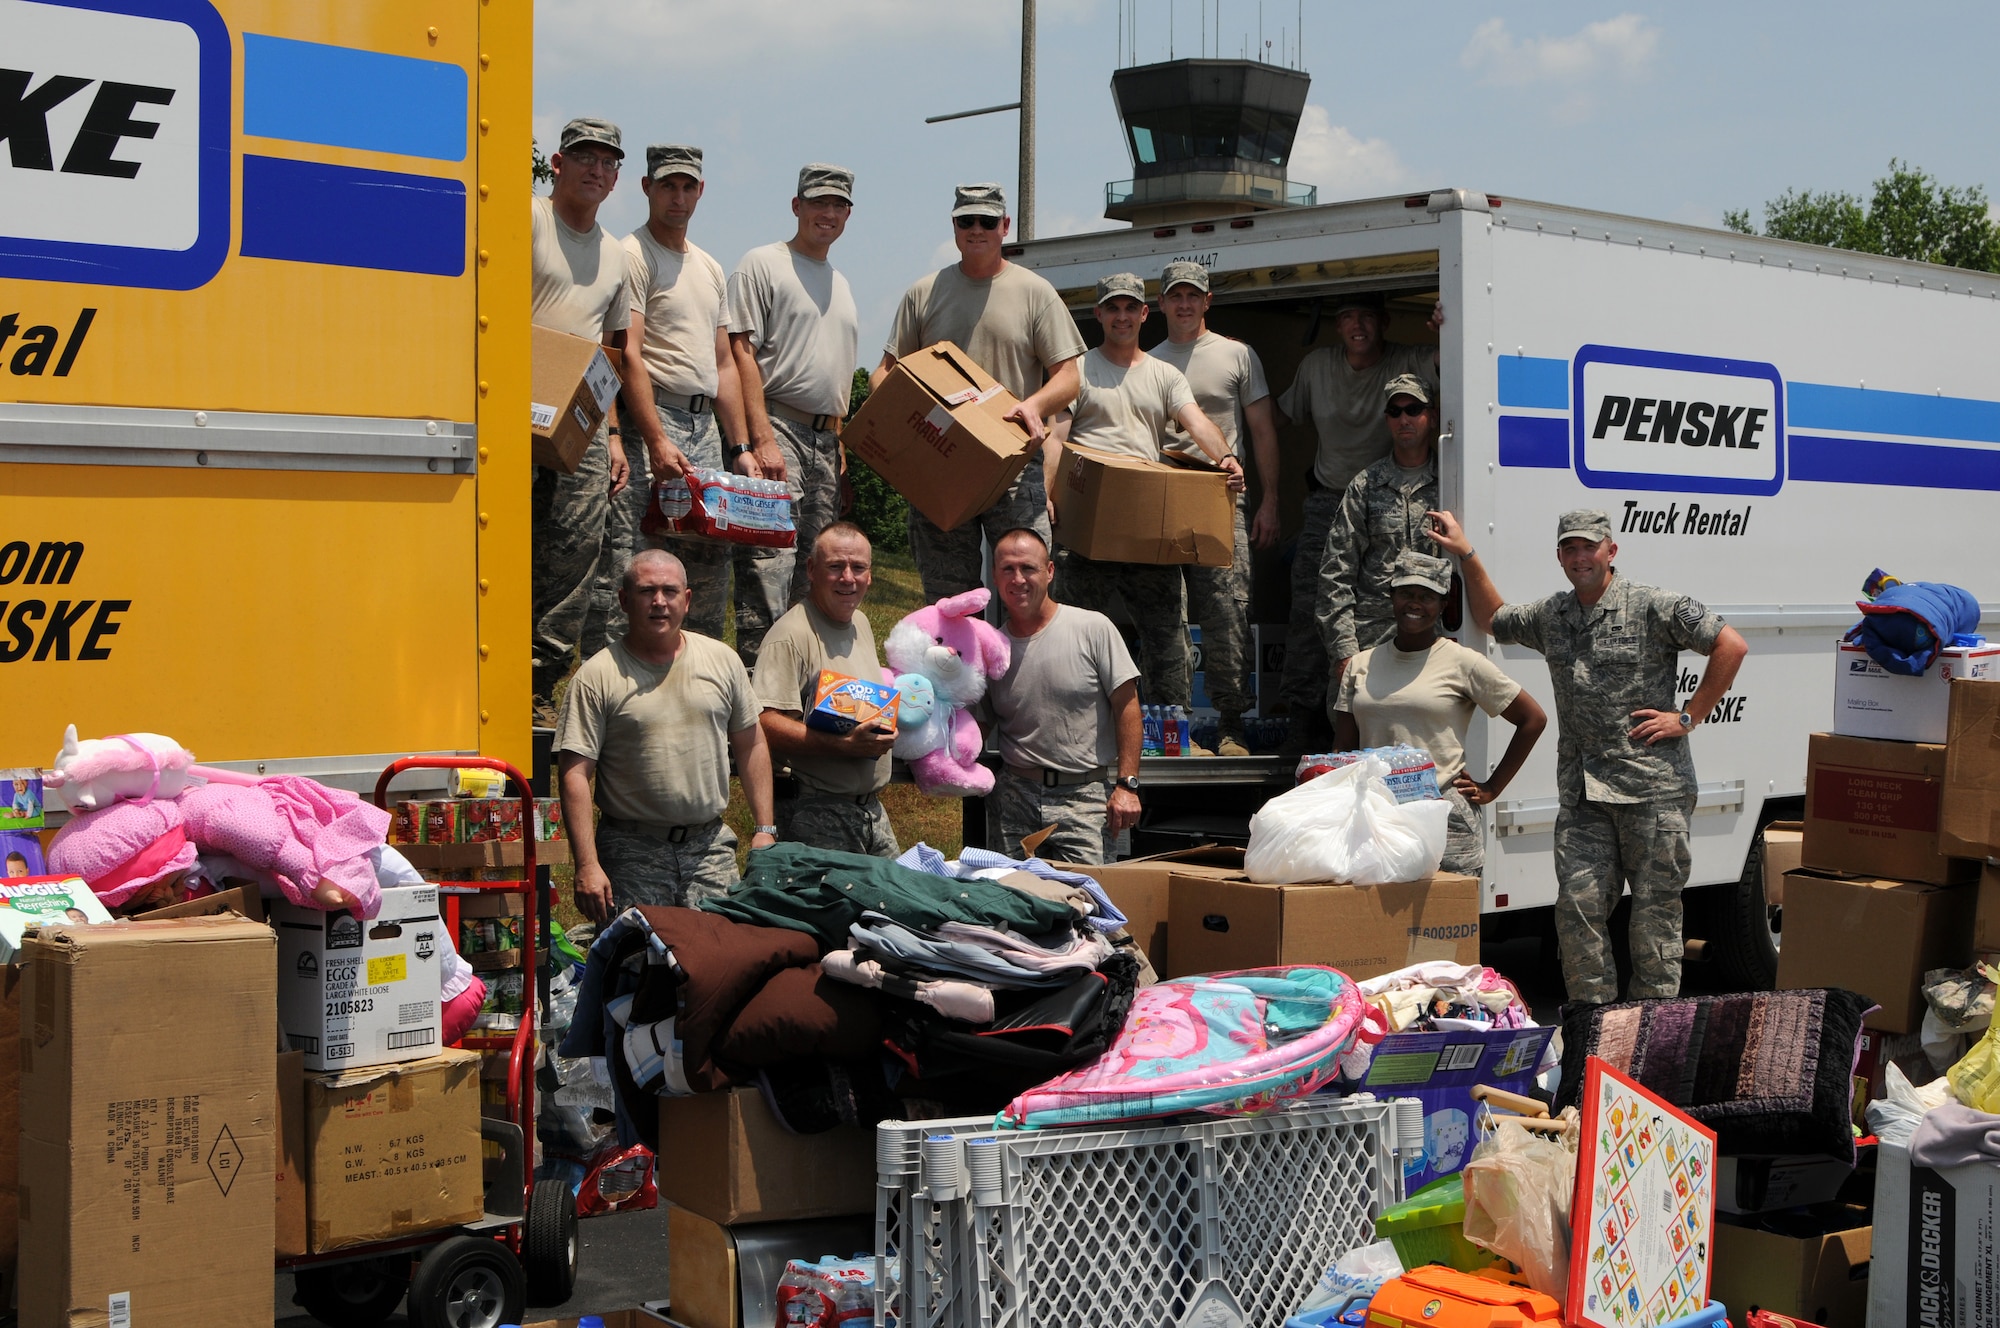 McGHEE TYSON AIR NATIONAL GUARD BASE, Tenn. -  Members of The I.G. Brown Air National Guard Training and Education Center help load a truck with donated items, June 3, 2011,that will be delivered to the victims of the tornado that devastated Joplin, Mo.  (U.S. Air Force photo by Master Sgt. Mavi Smith/Released)